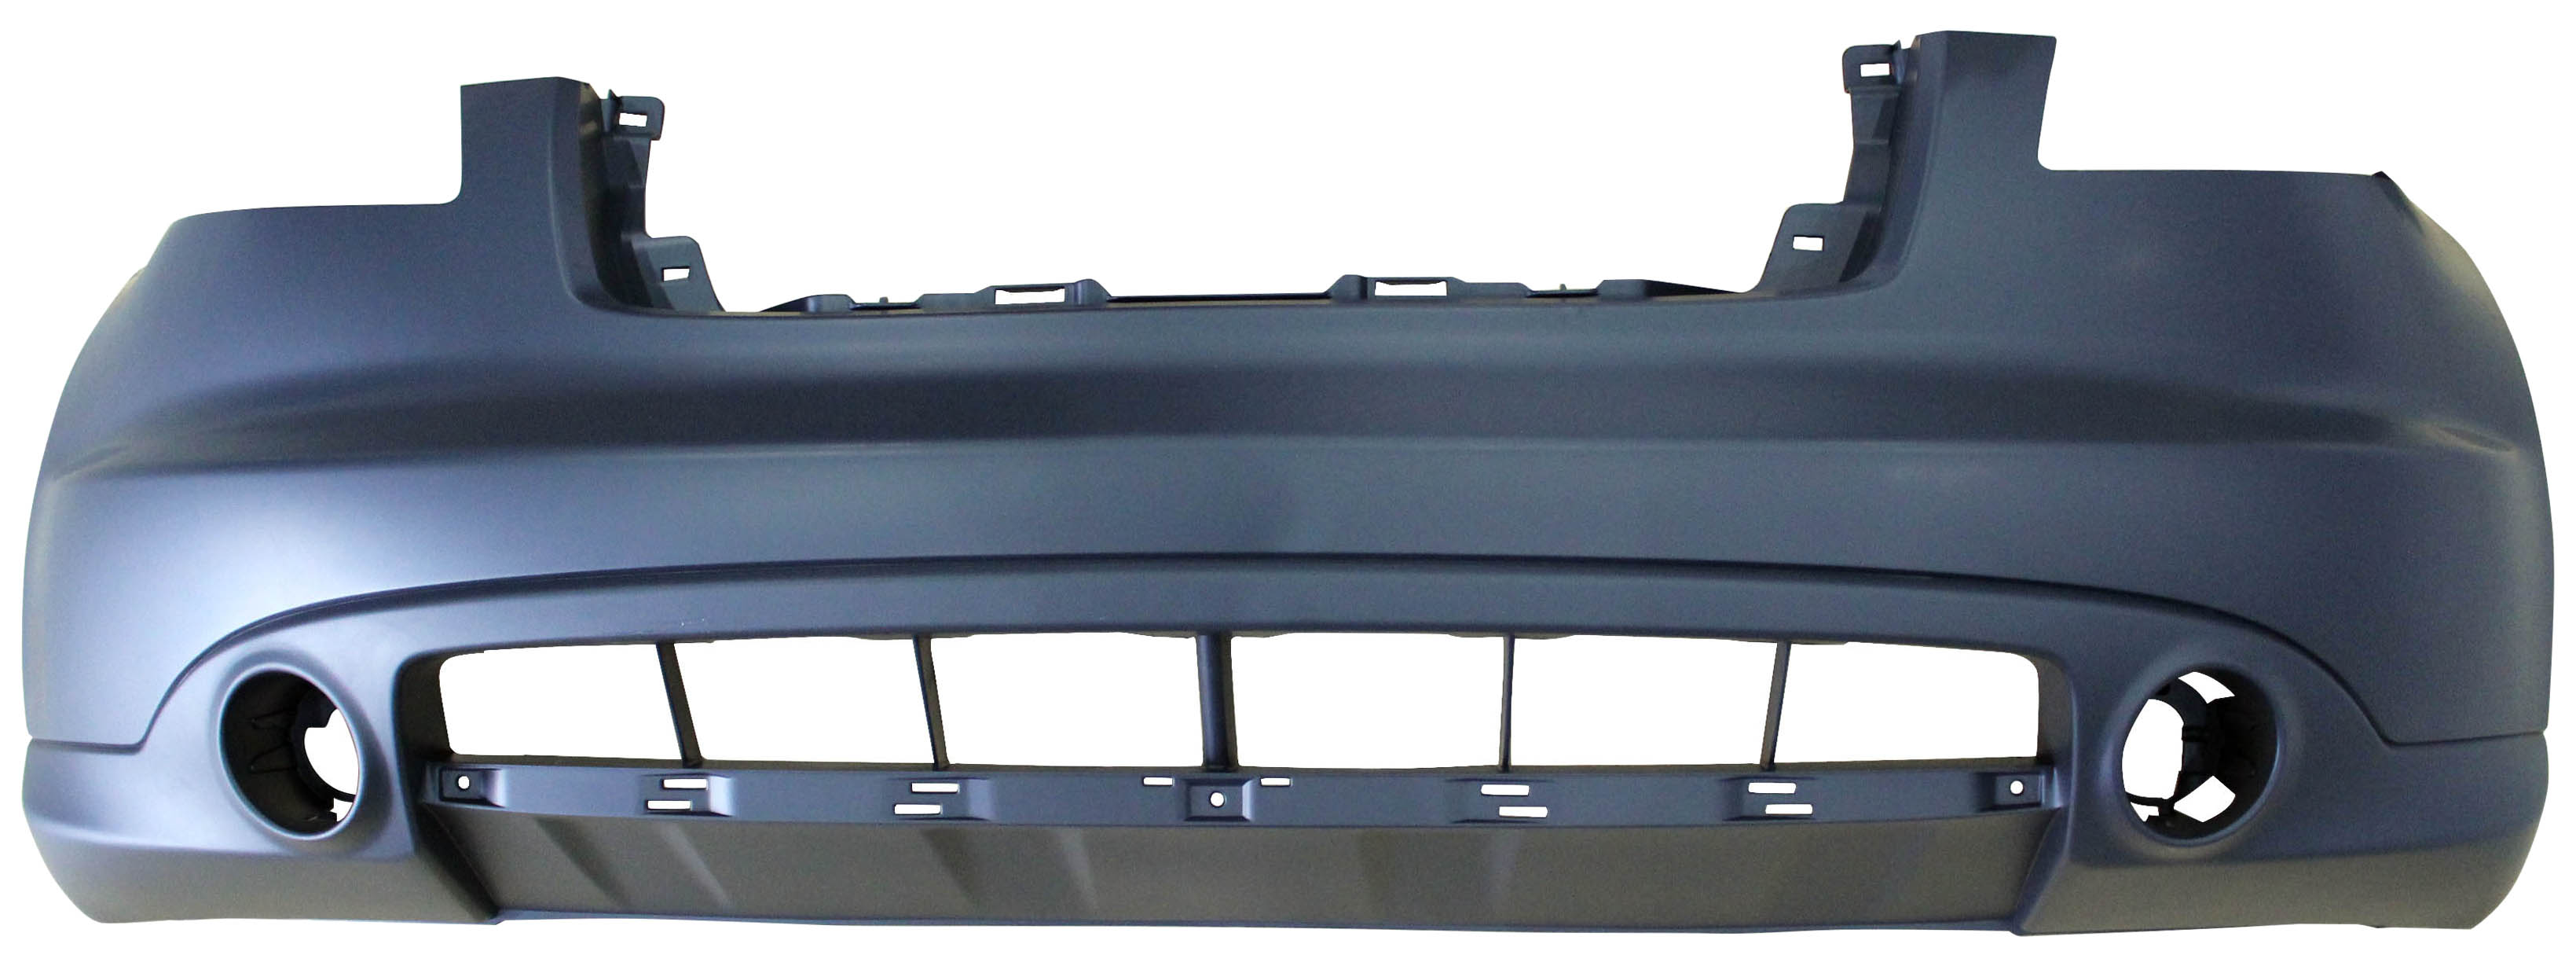 Aftermarket BUMPER COVERS for INFINITI - FX35, FX35,06-07,Front bumper cover